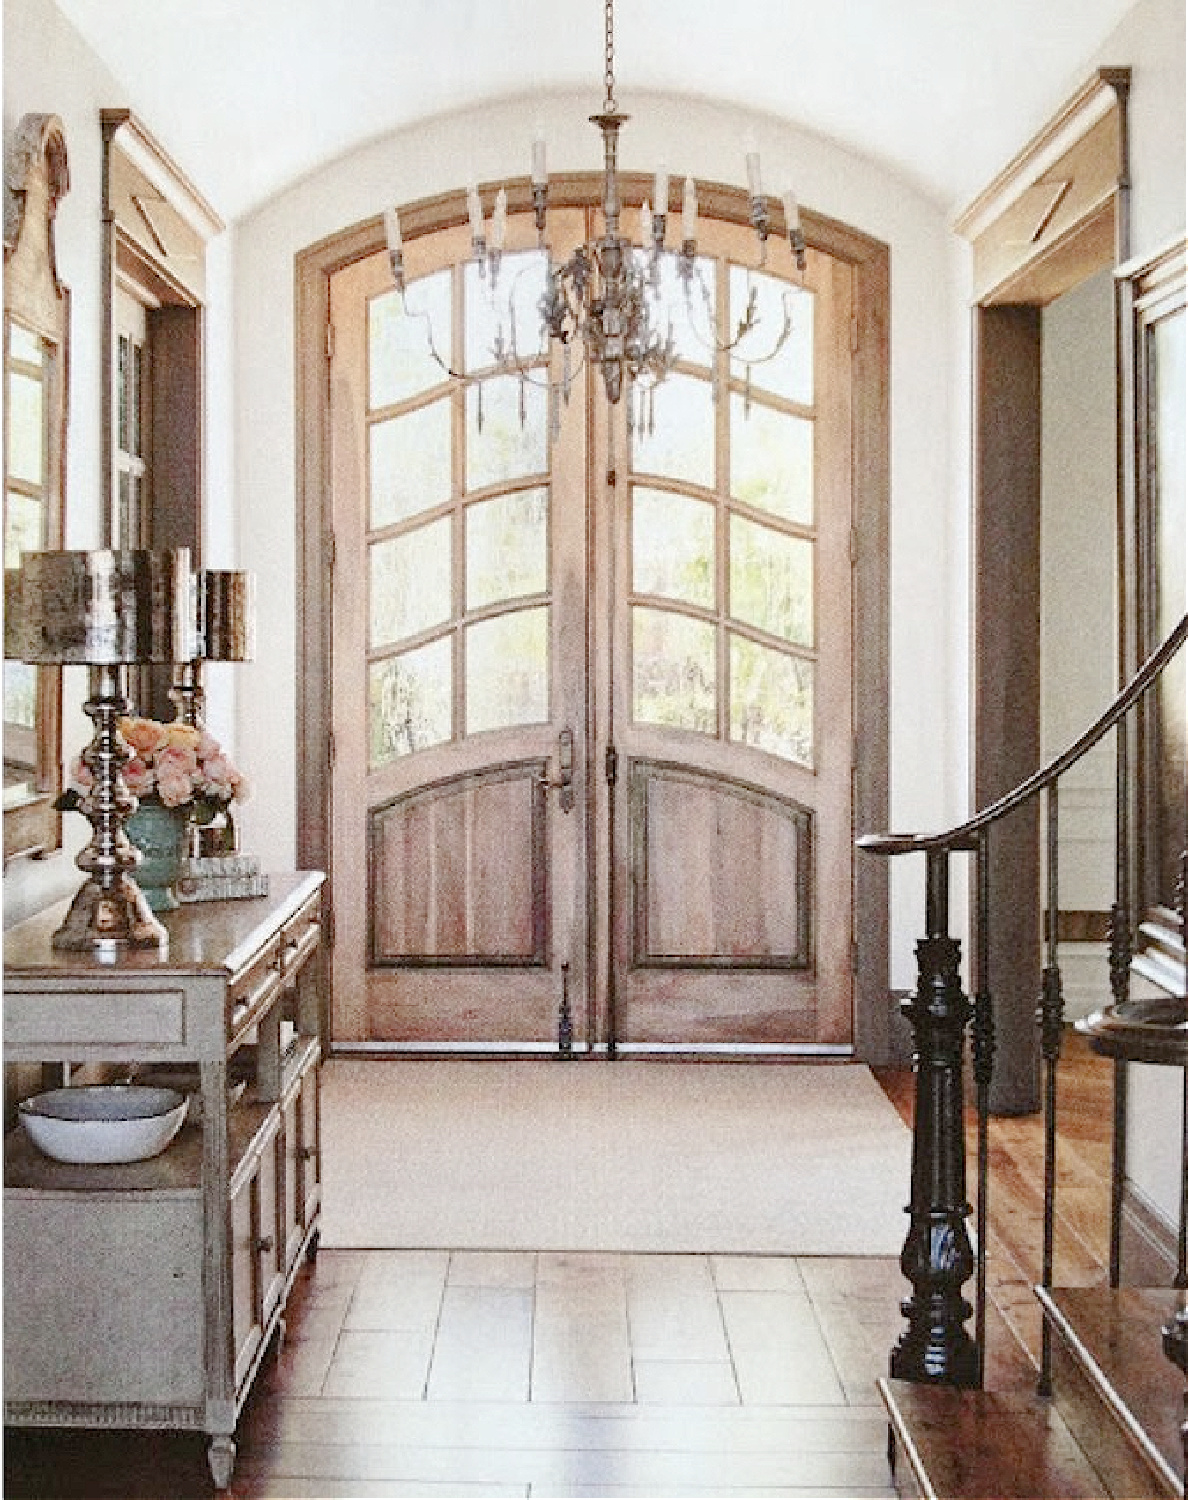 Arched double doors in French country entry of a home by Desiree Ashworth - styling by Bonnie Broten for COUNTRY FRENCH magazine. #archeddoors